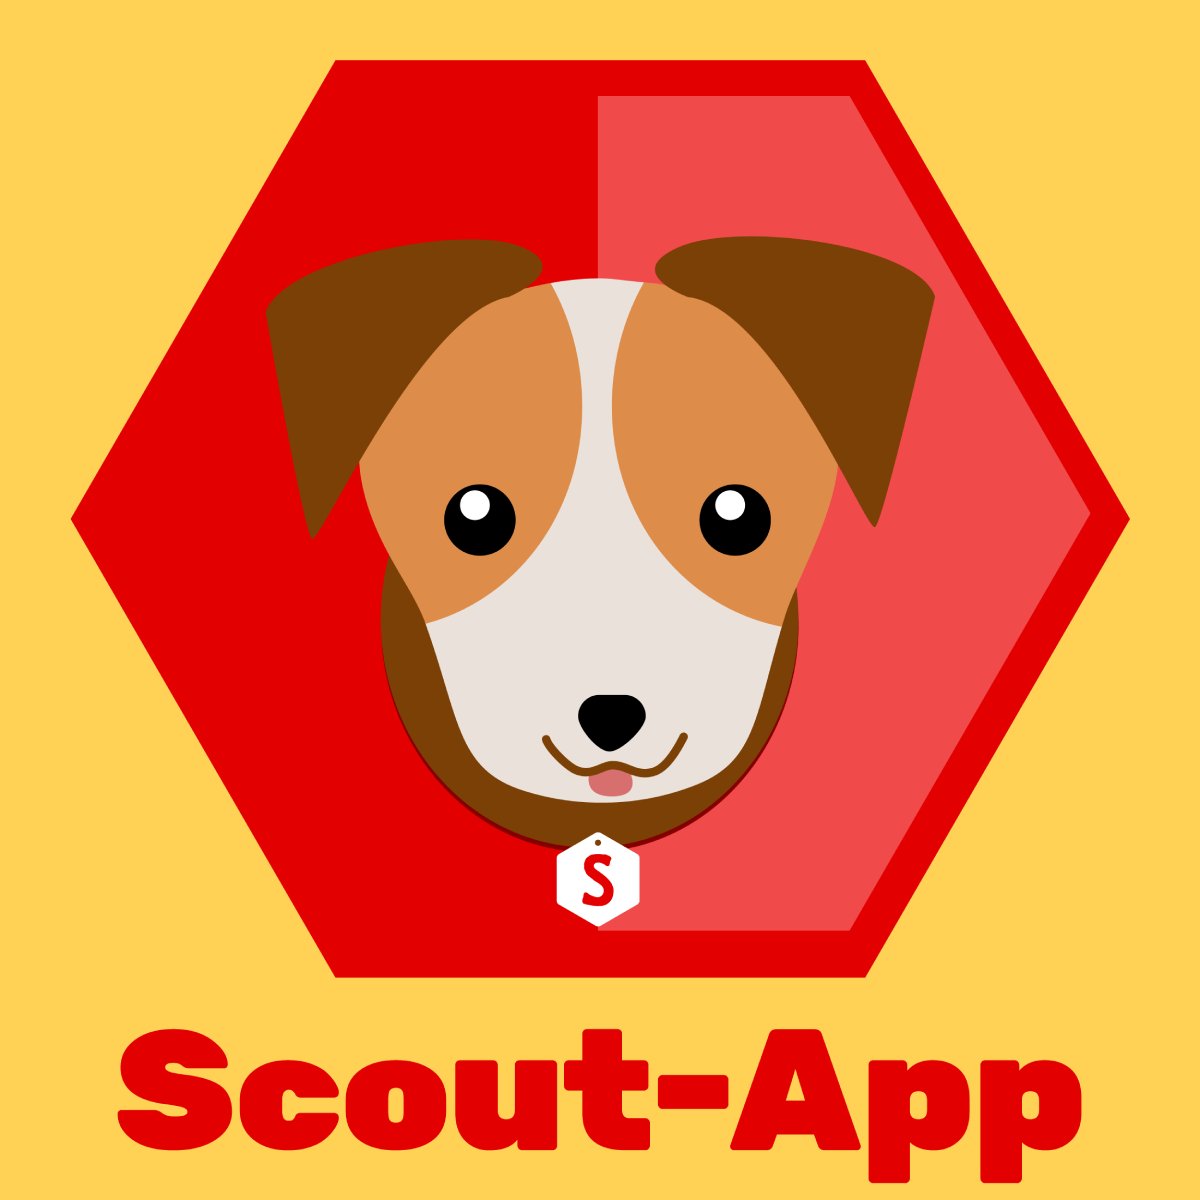 How to Install Scout App in Ubuntu 18.04 Bionic - Featured